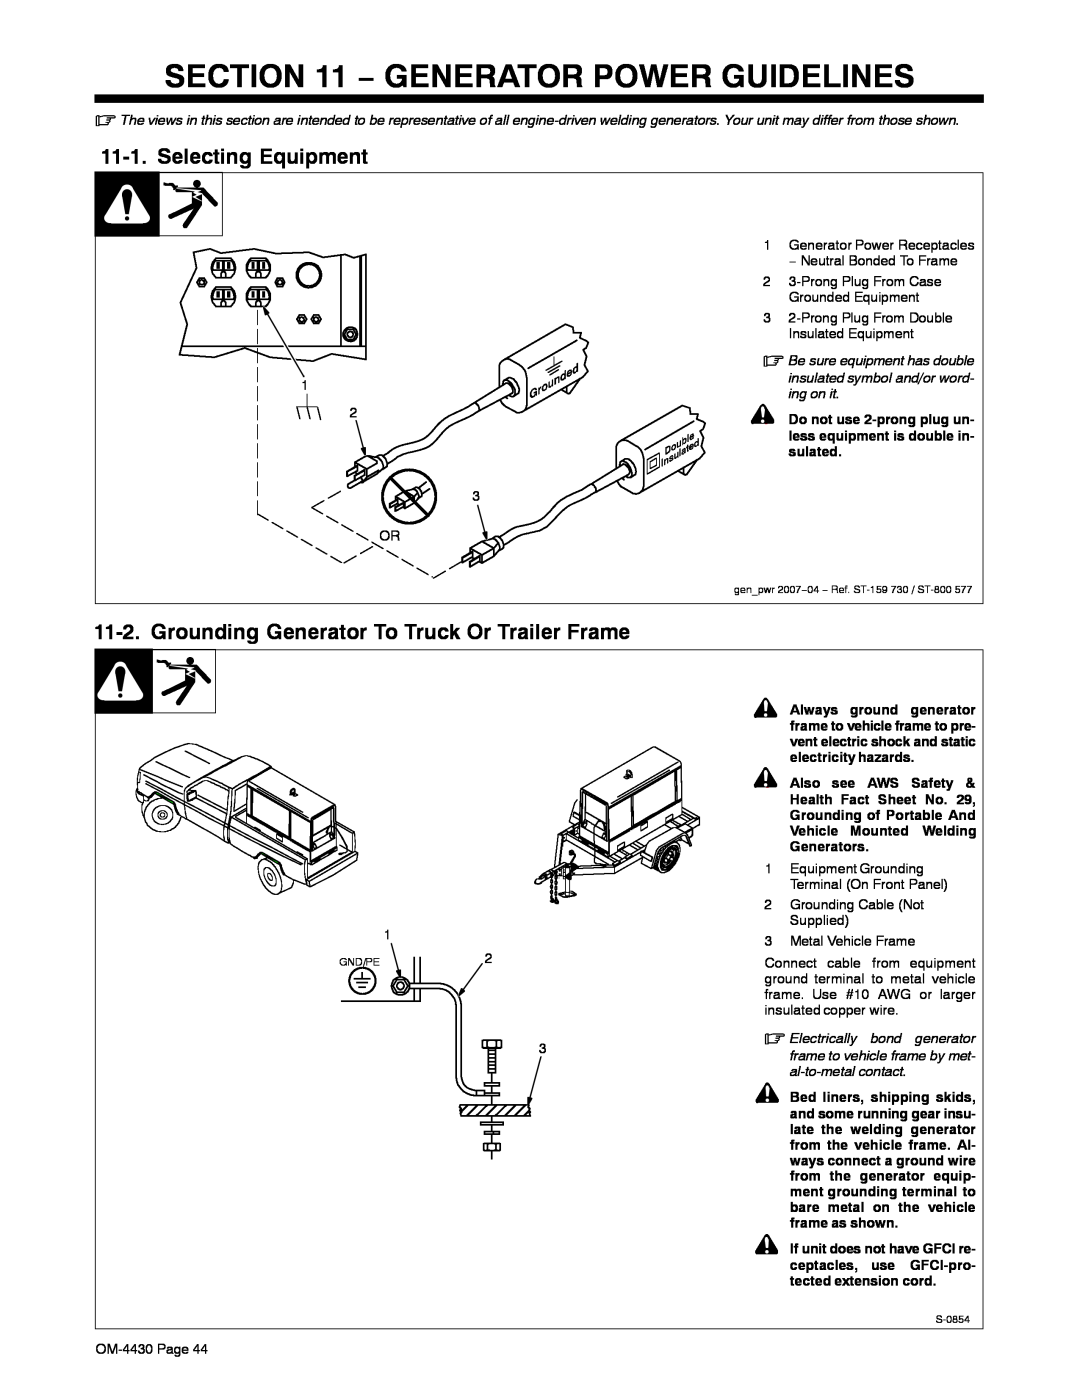 Miller Electric 280 NT Generator Power Guidelines, Selecting Equipment, Grounding Generator To Truck Or Trailer Frame 